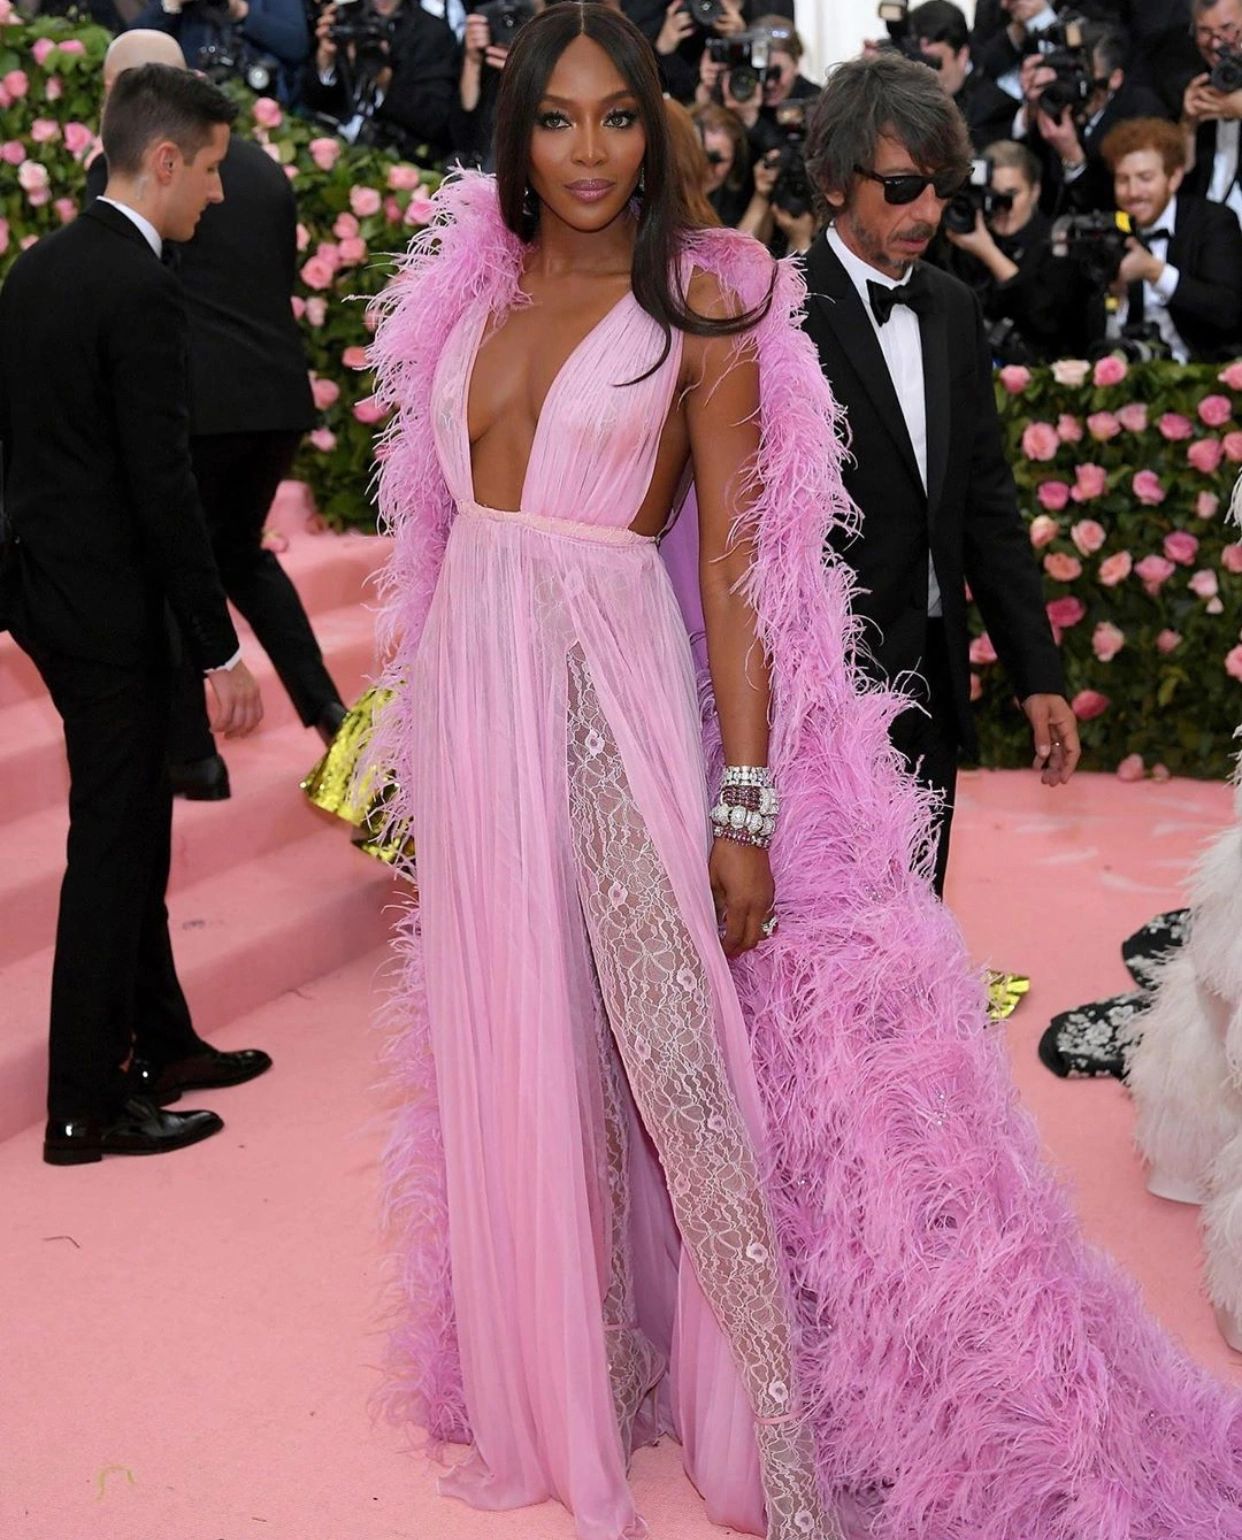 Met Gala, 2019: Naomi Campbell. (Getty Images)